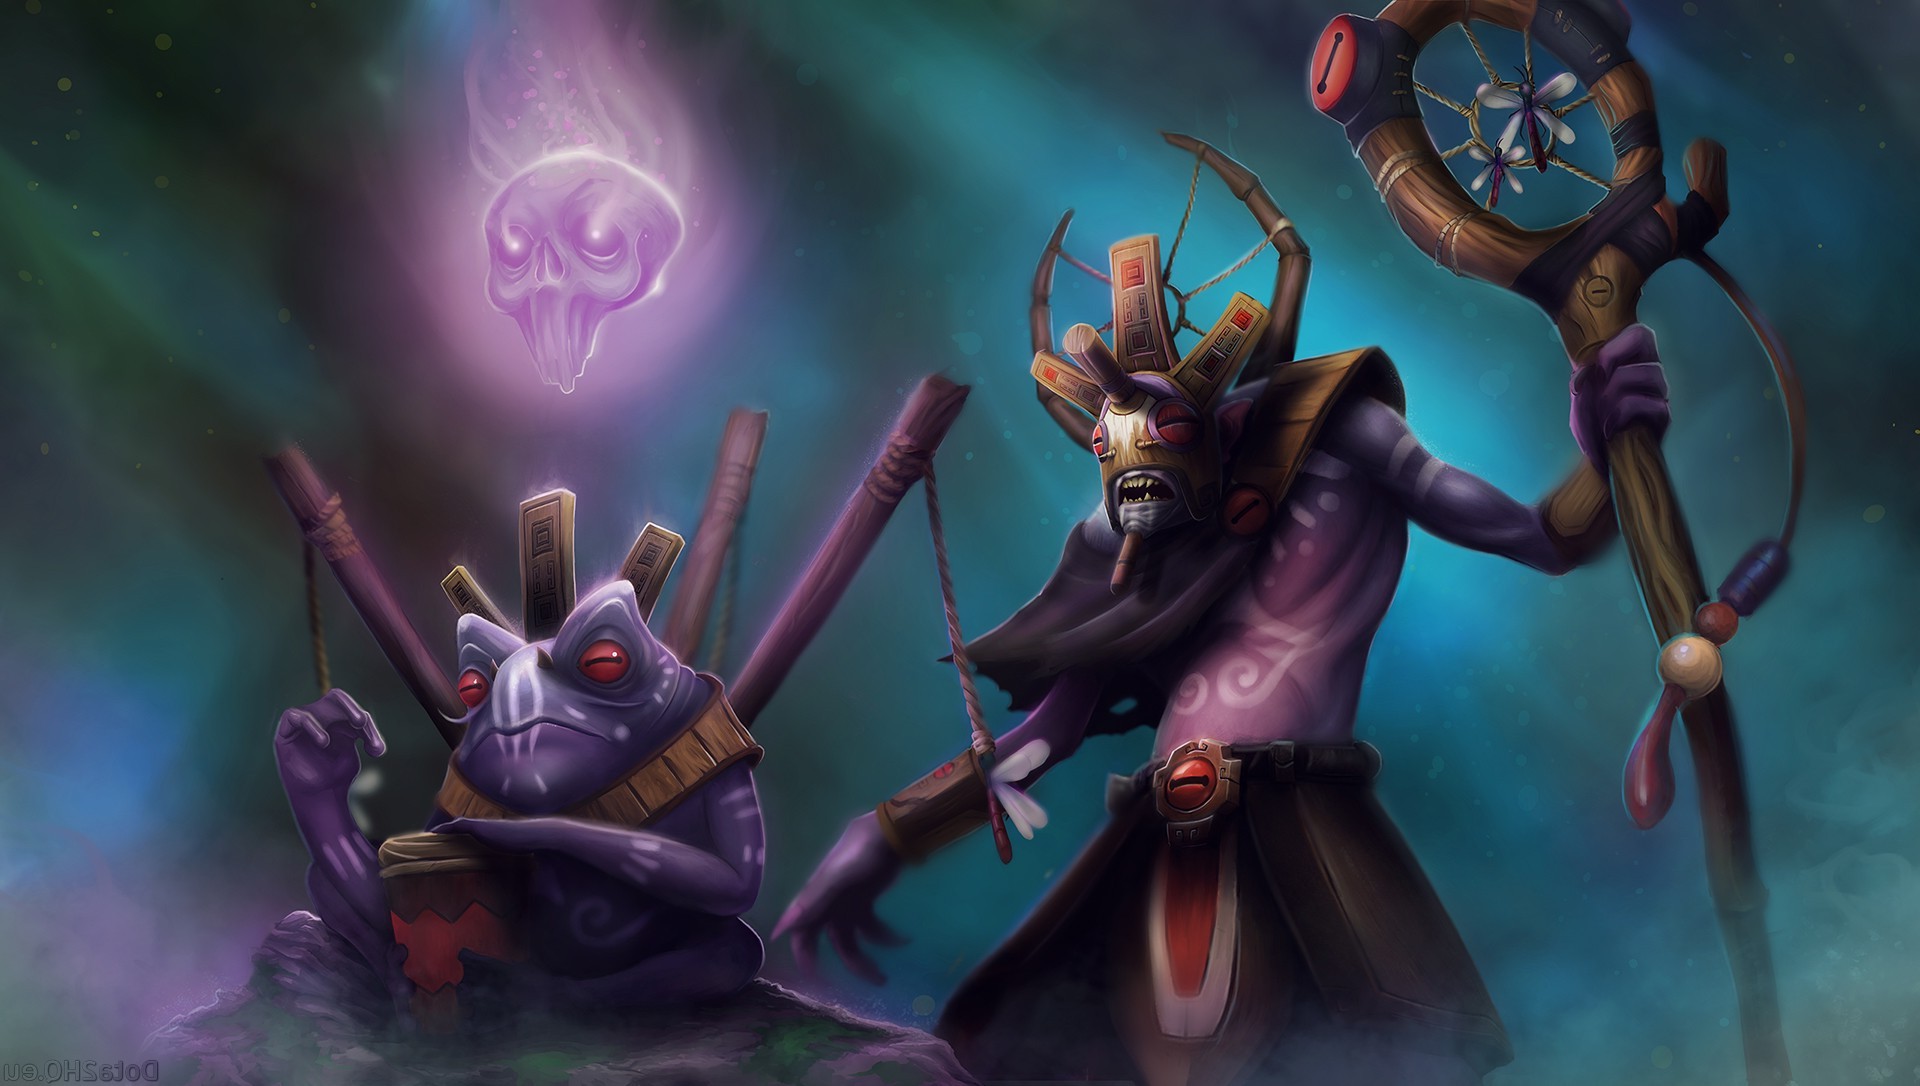 Dota, Dota 2, Defense Of The Ancient, Valve, Valve Corporation, Witch Doctor, Heroes Wallpaper